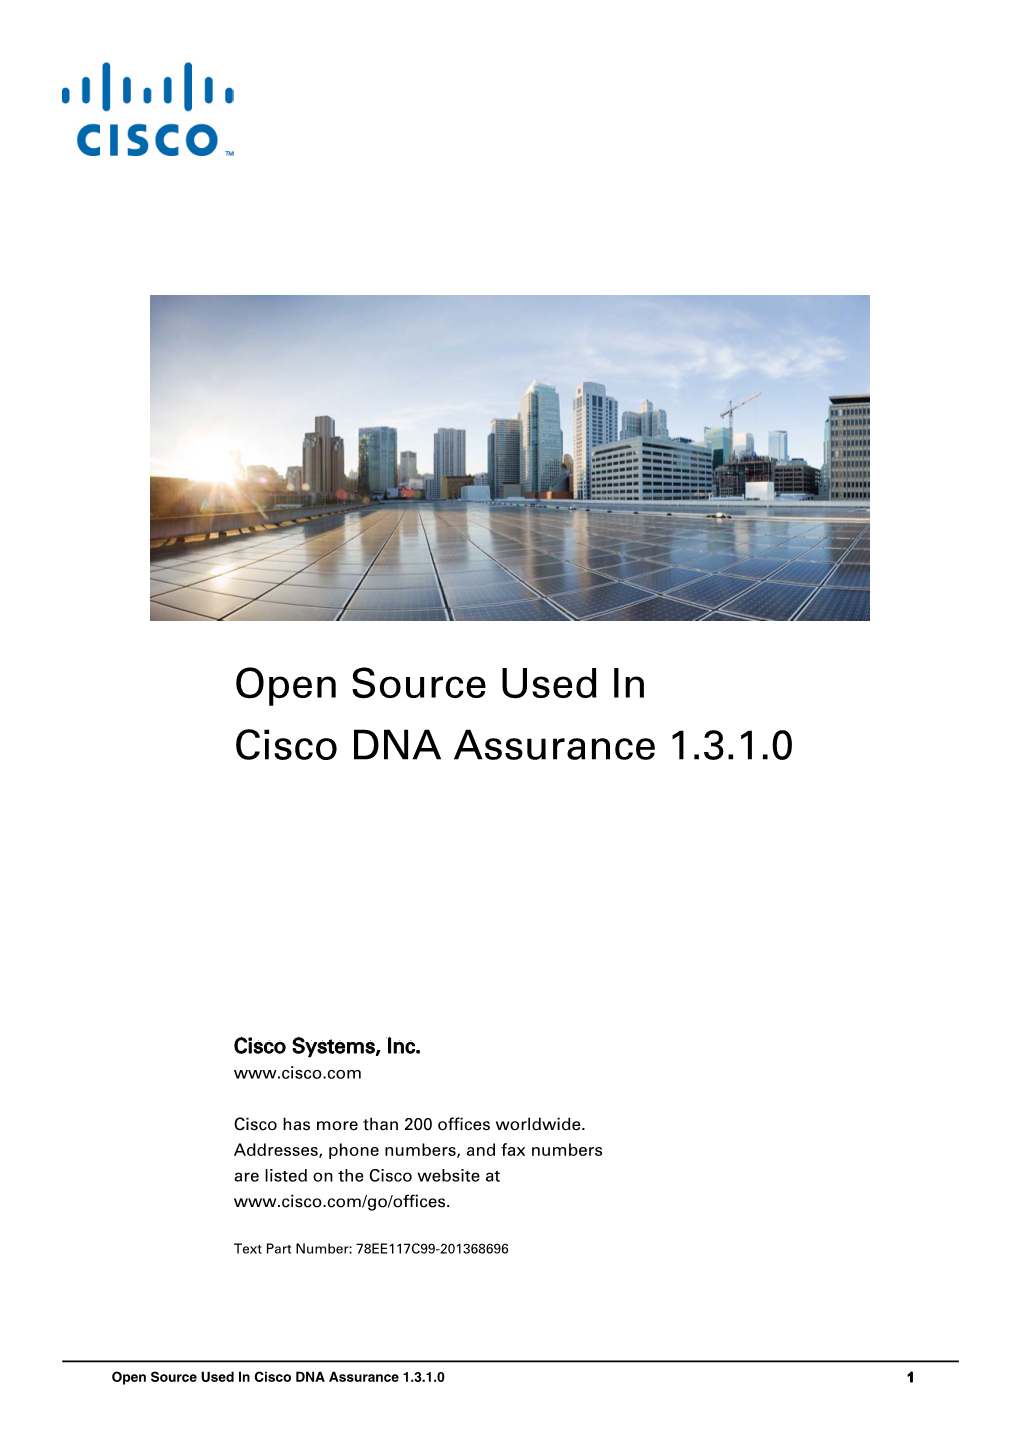 Open Source Used in Cisco DNA Assurance Release 1.3.X